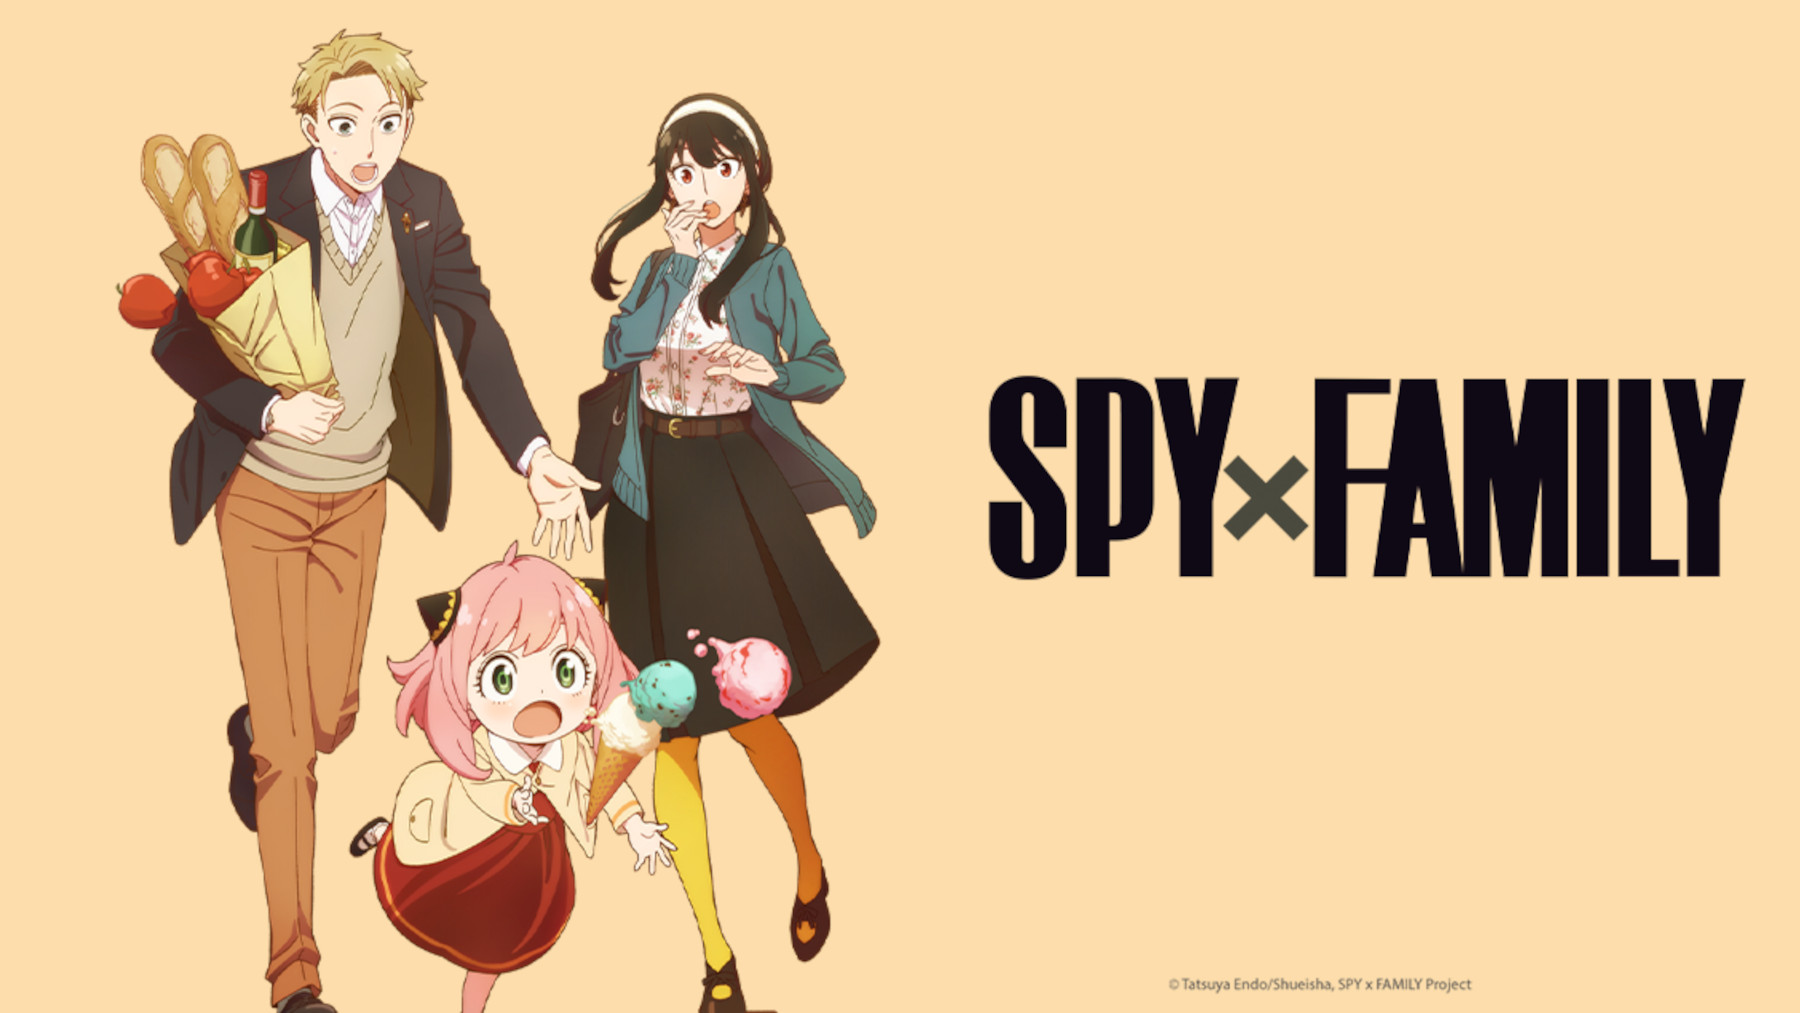 Spy x Family' part two sets October release date